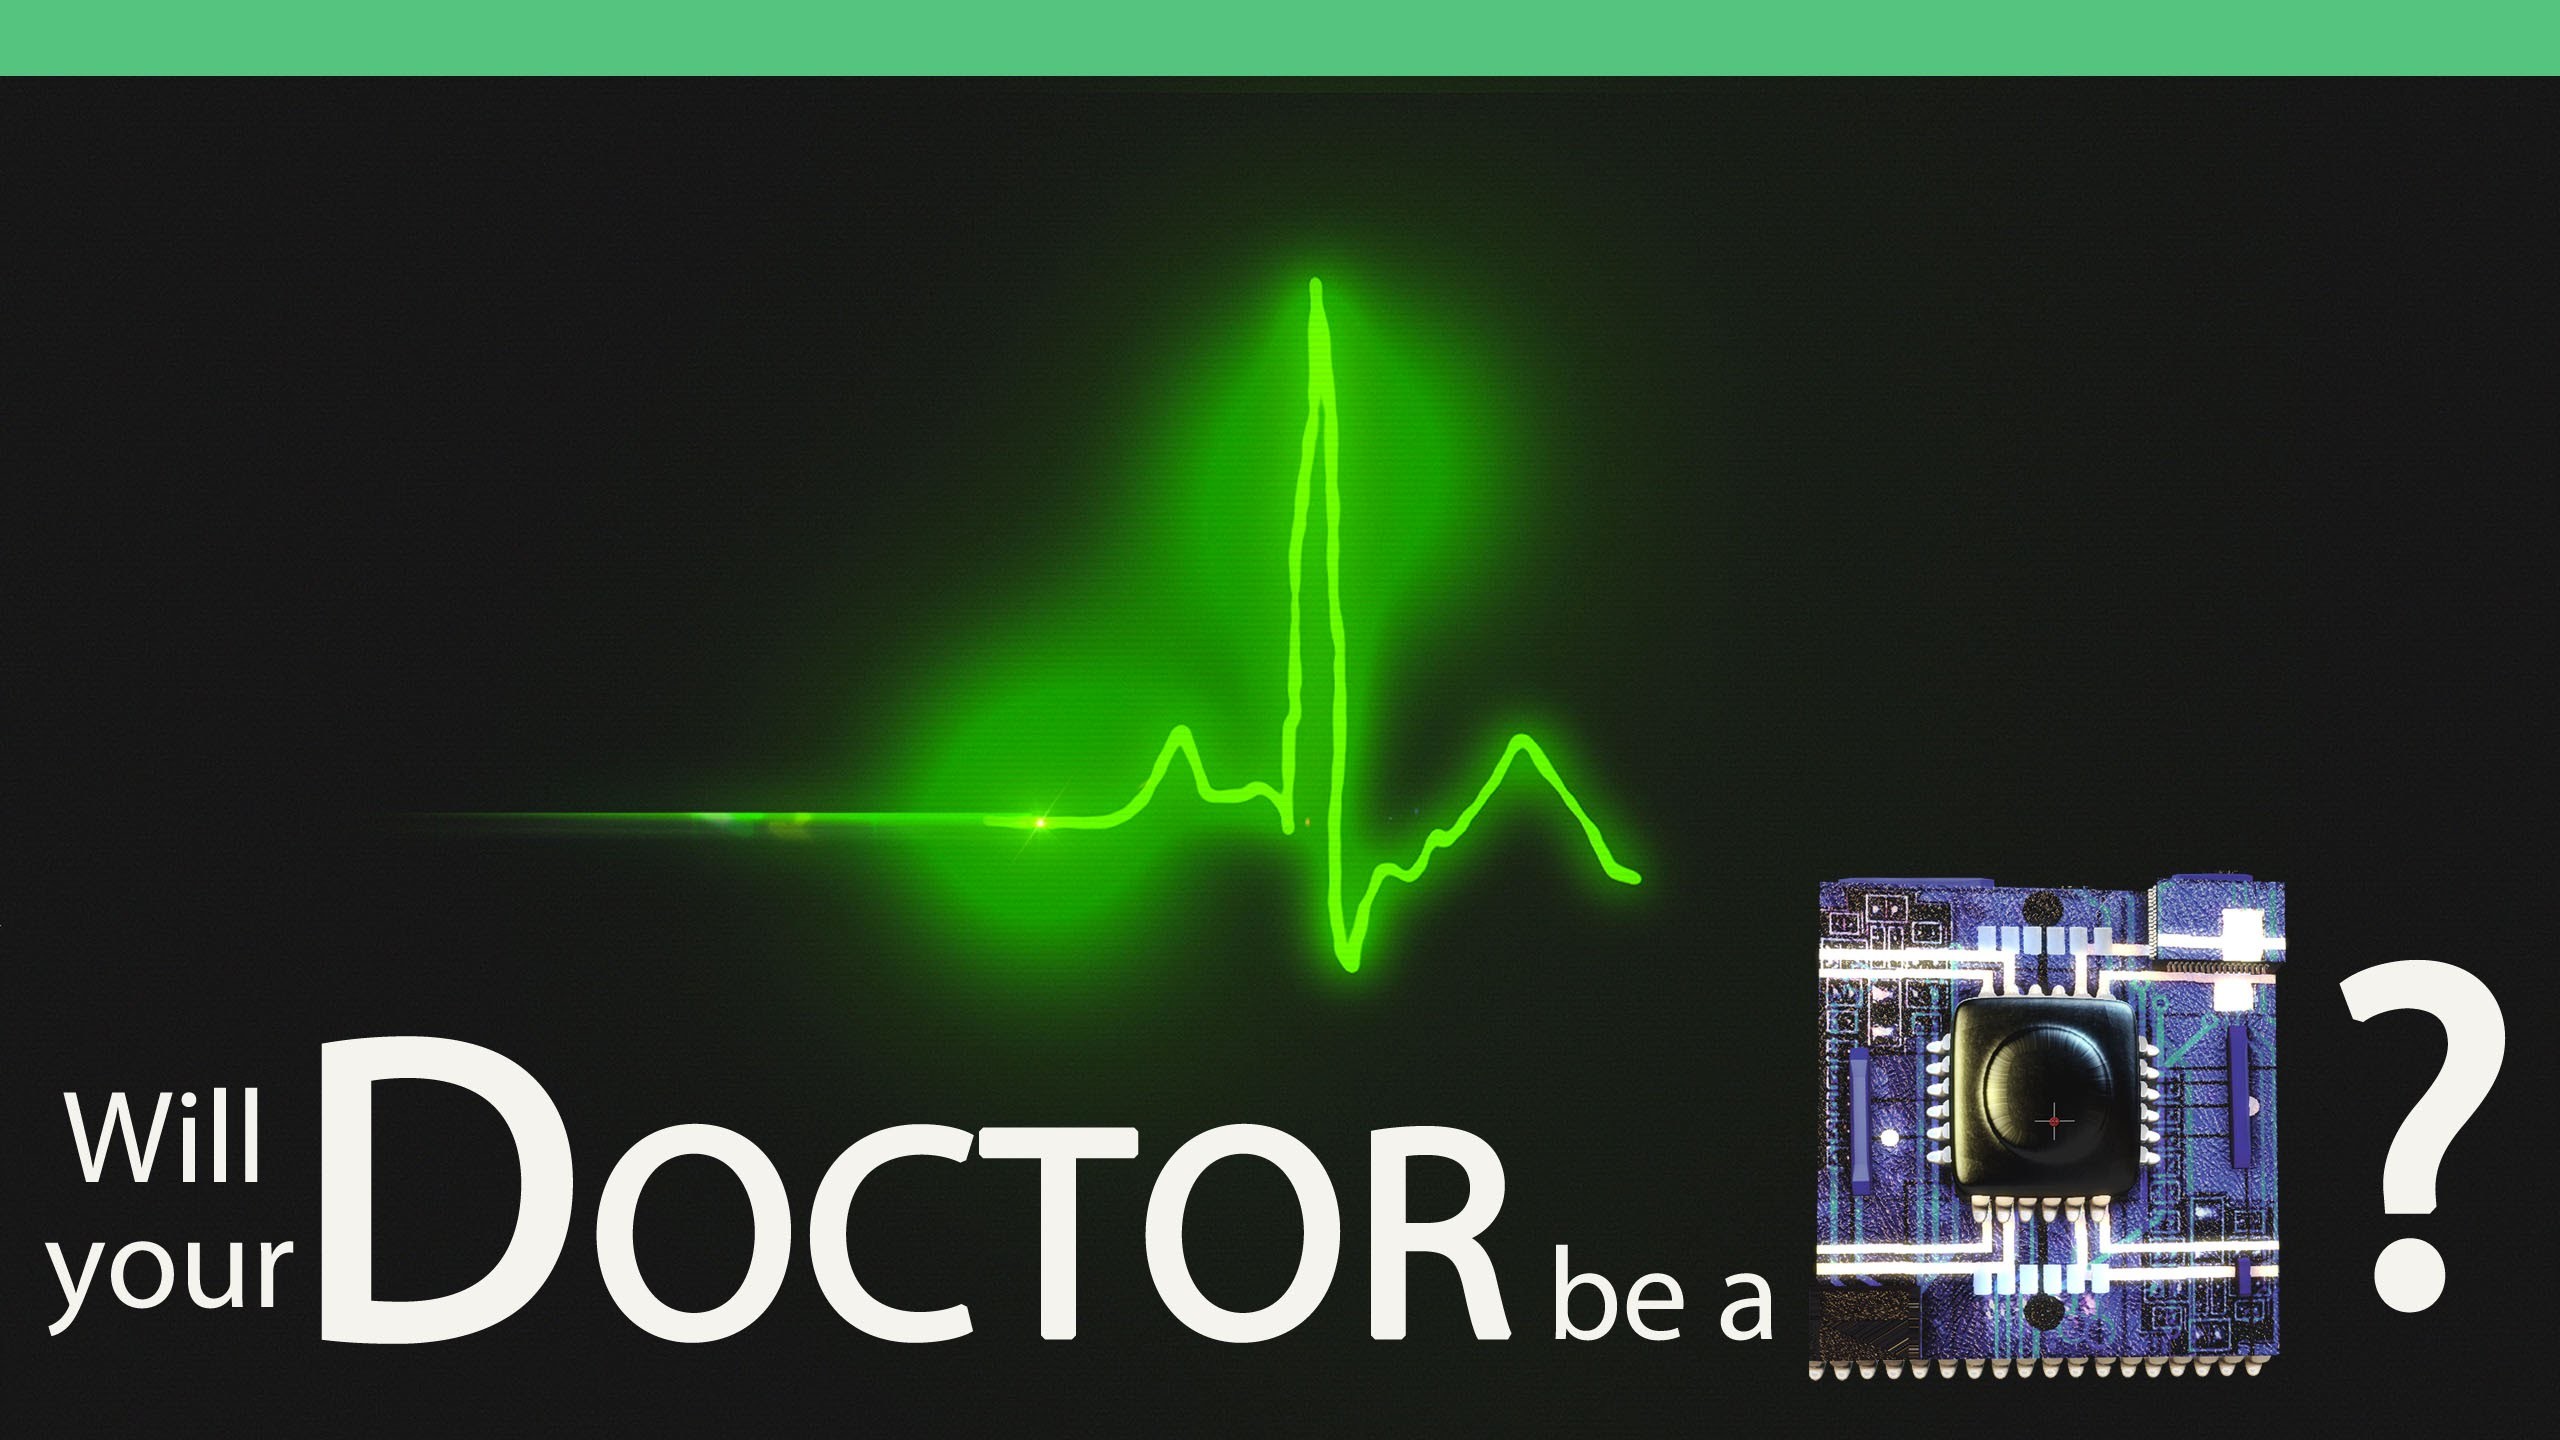 2560x1440 IBM Watson: Will Your Doctor be a Robot?